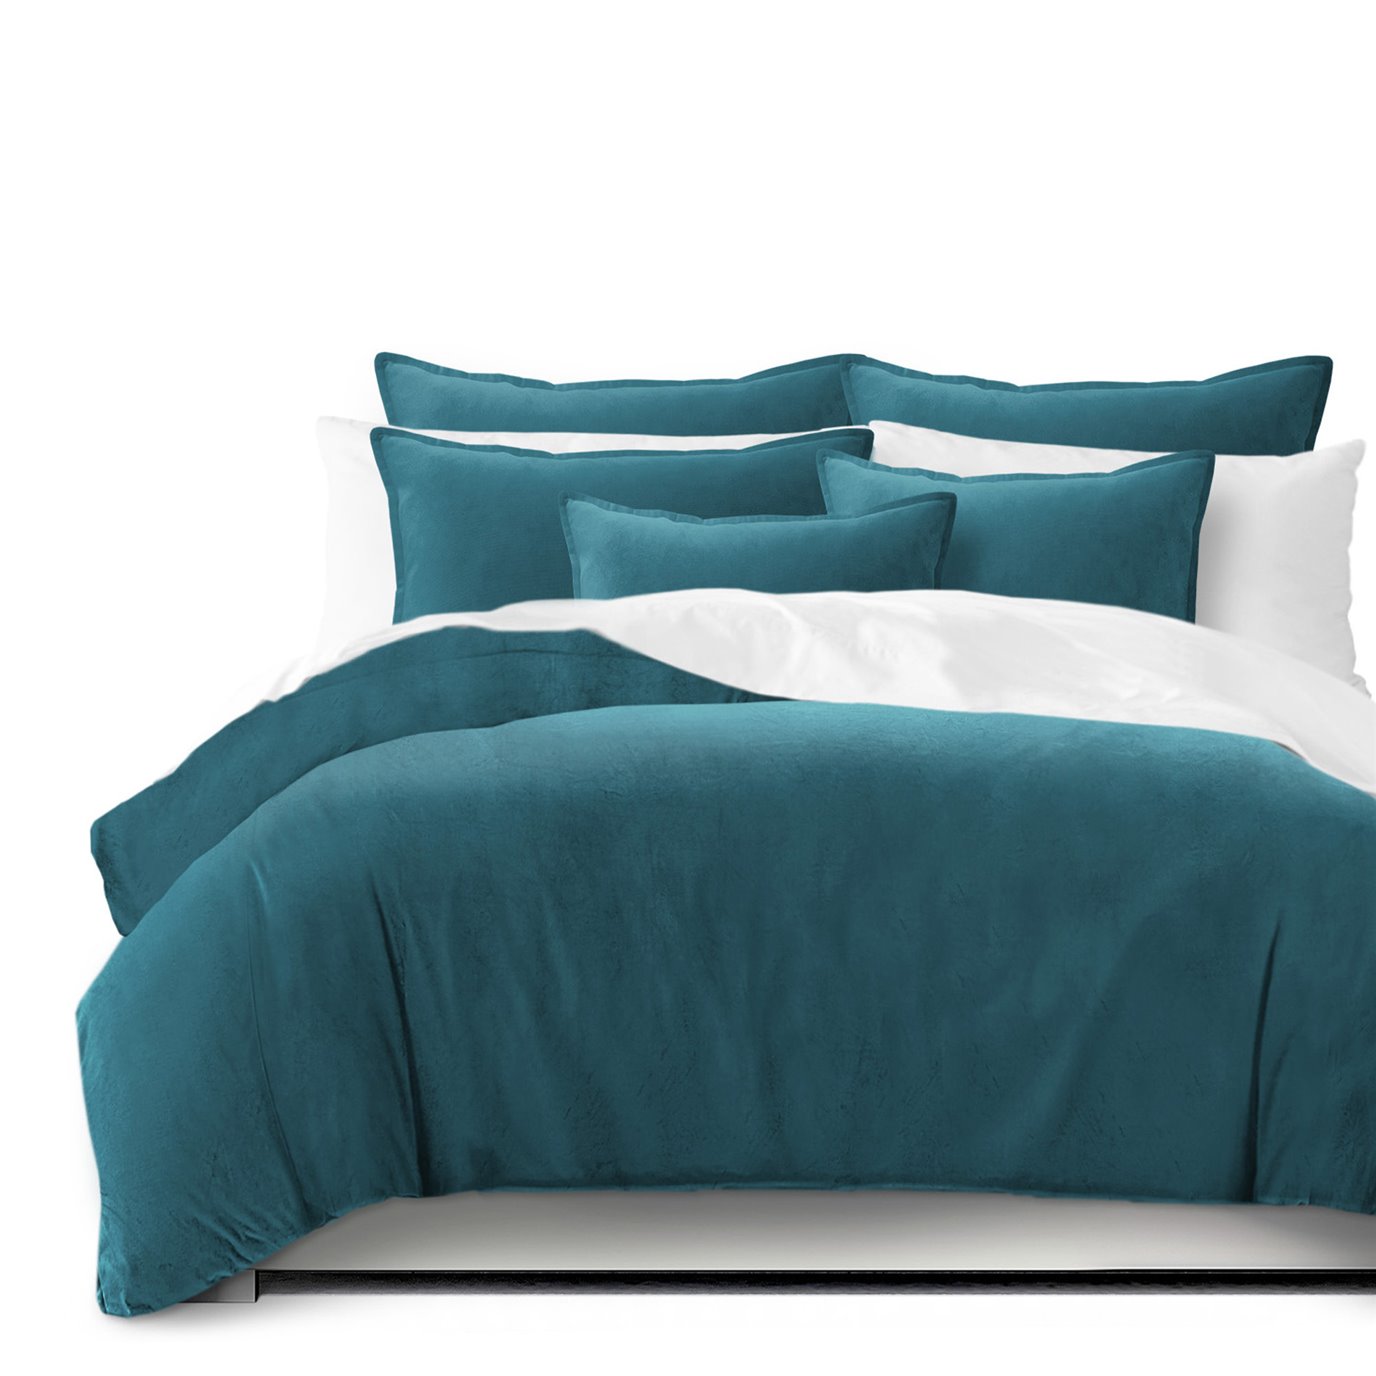 Vanessa Turquoise Coverlet and Pillow Sham(s) Set - Size Full